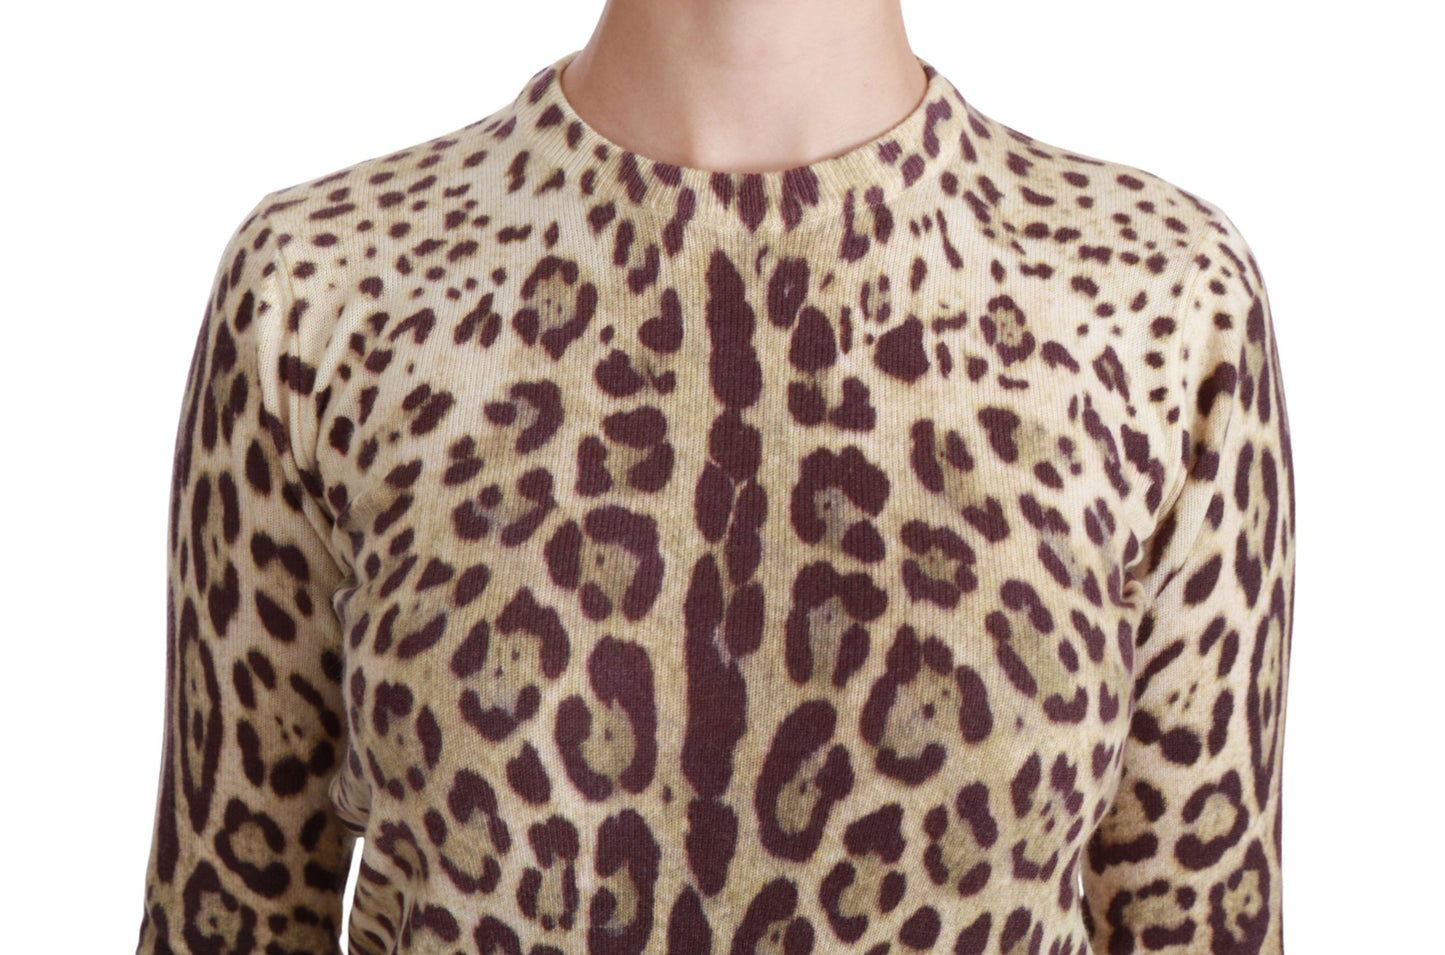 Leopard Cashmere Long Sleeve Blouse Sweater